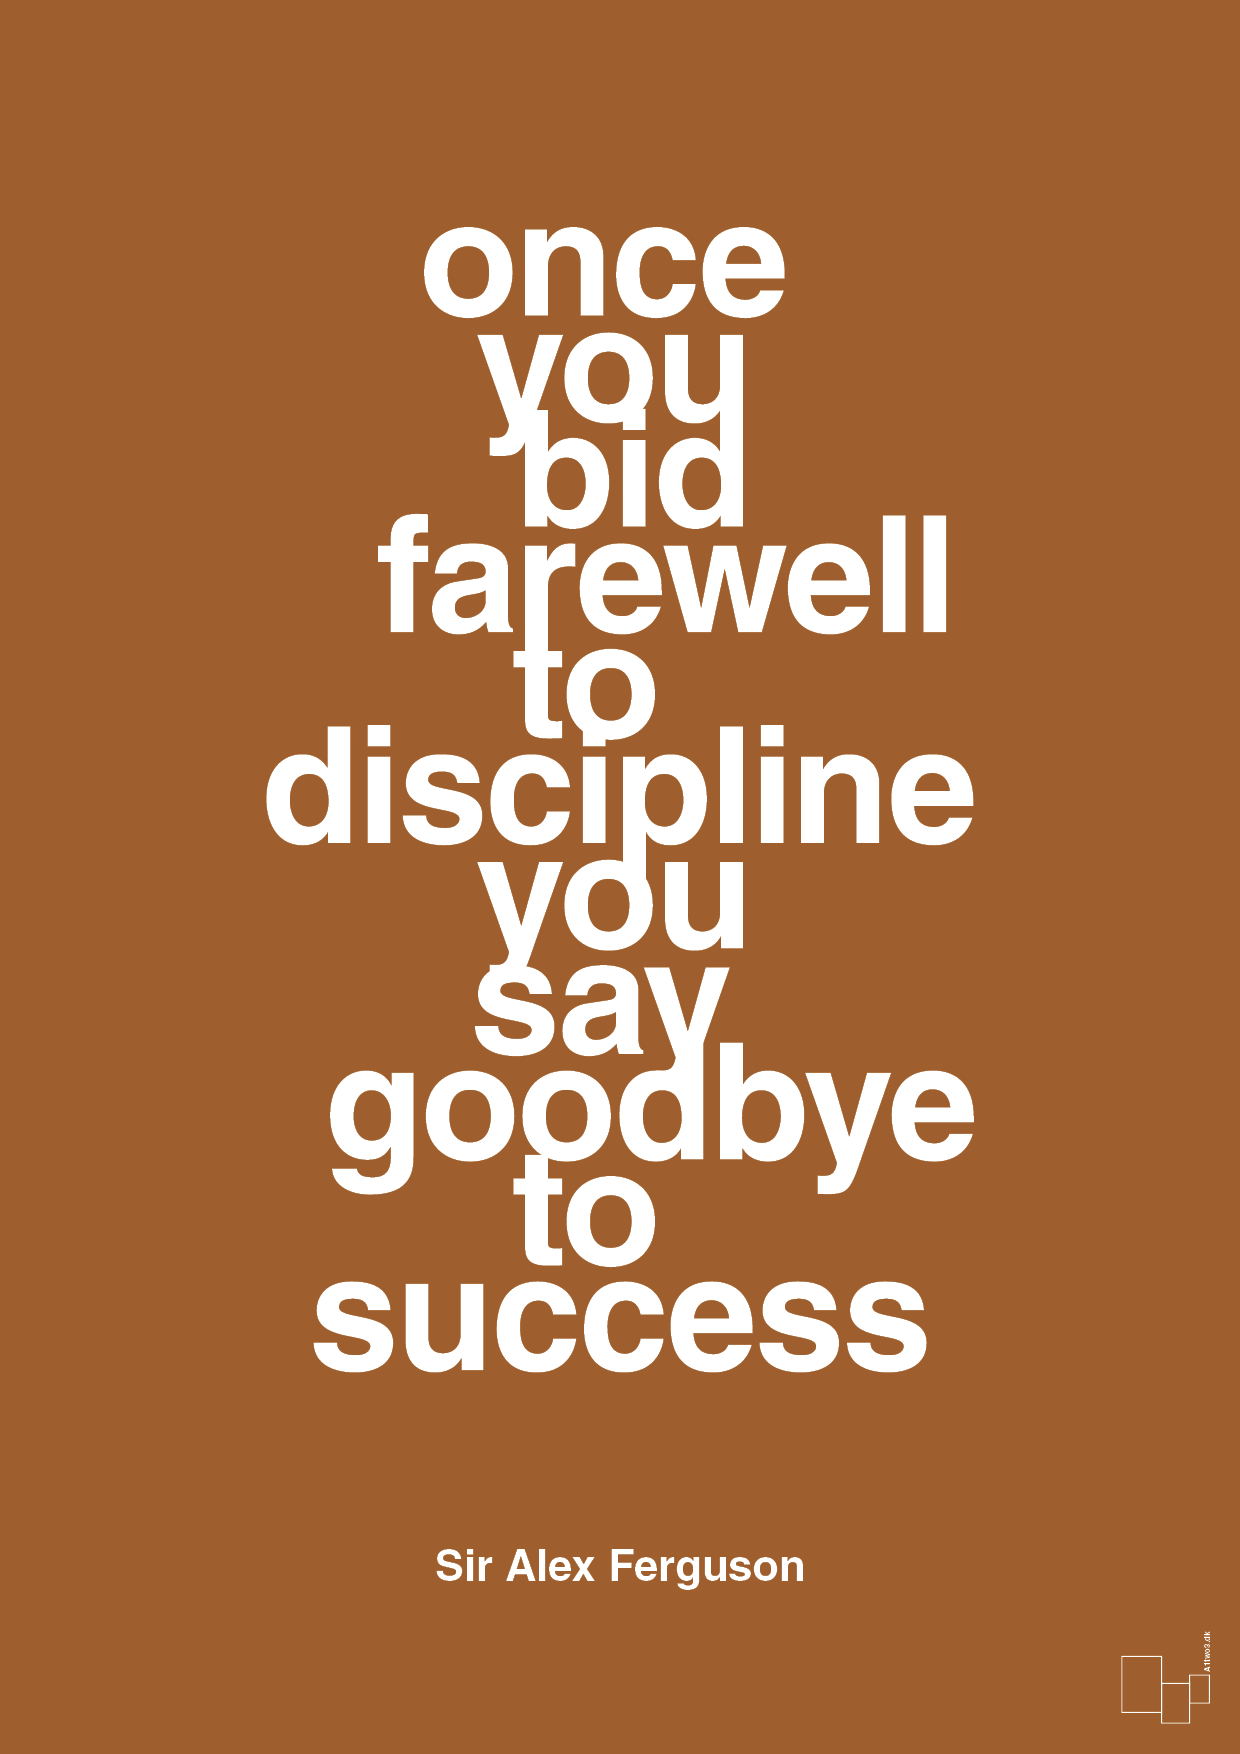 once you bid farewell to discipline you say goodbye to success - Plakat med Citater i Cognac